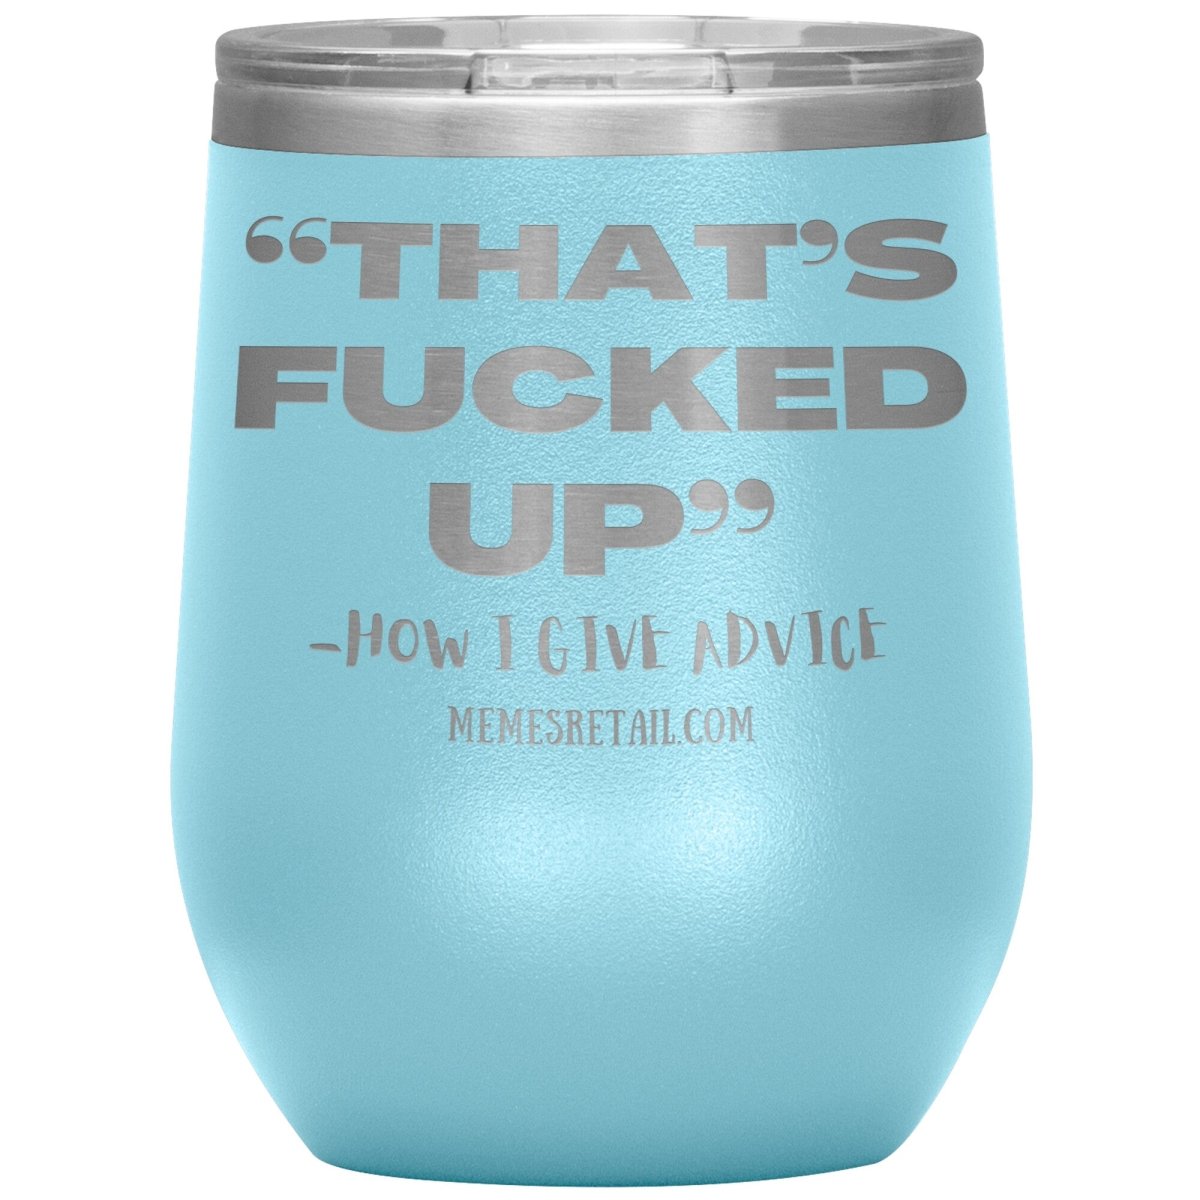 “That’s Fucked Up” -how I give advice Tumblers, 12oz Wine Insulated Tumbler / Light Blue - MemesRetail.com